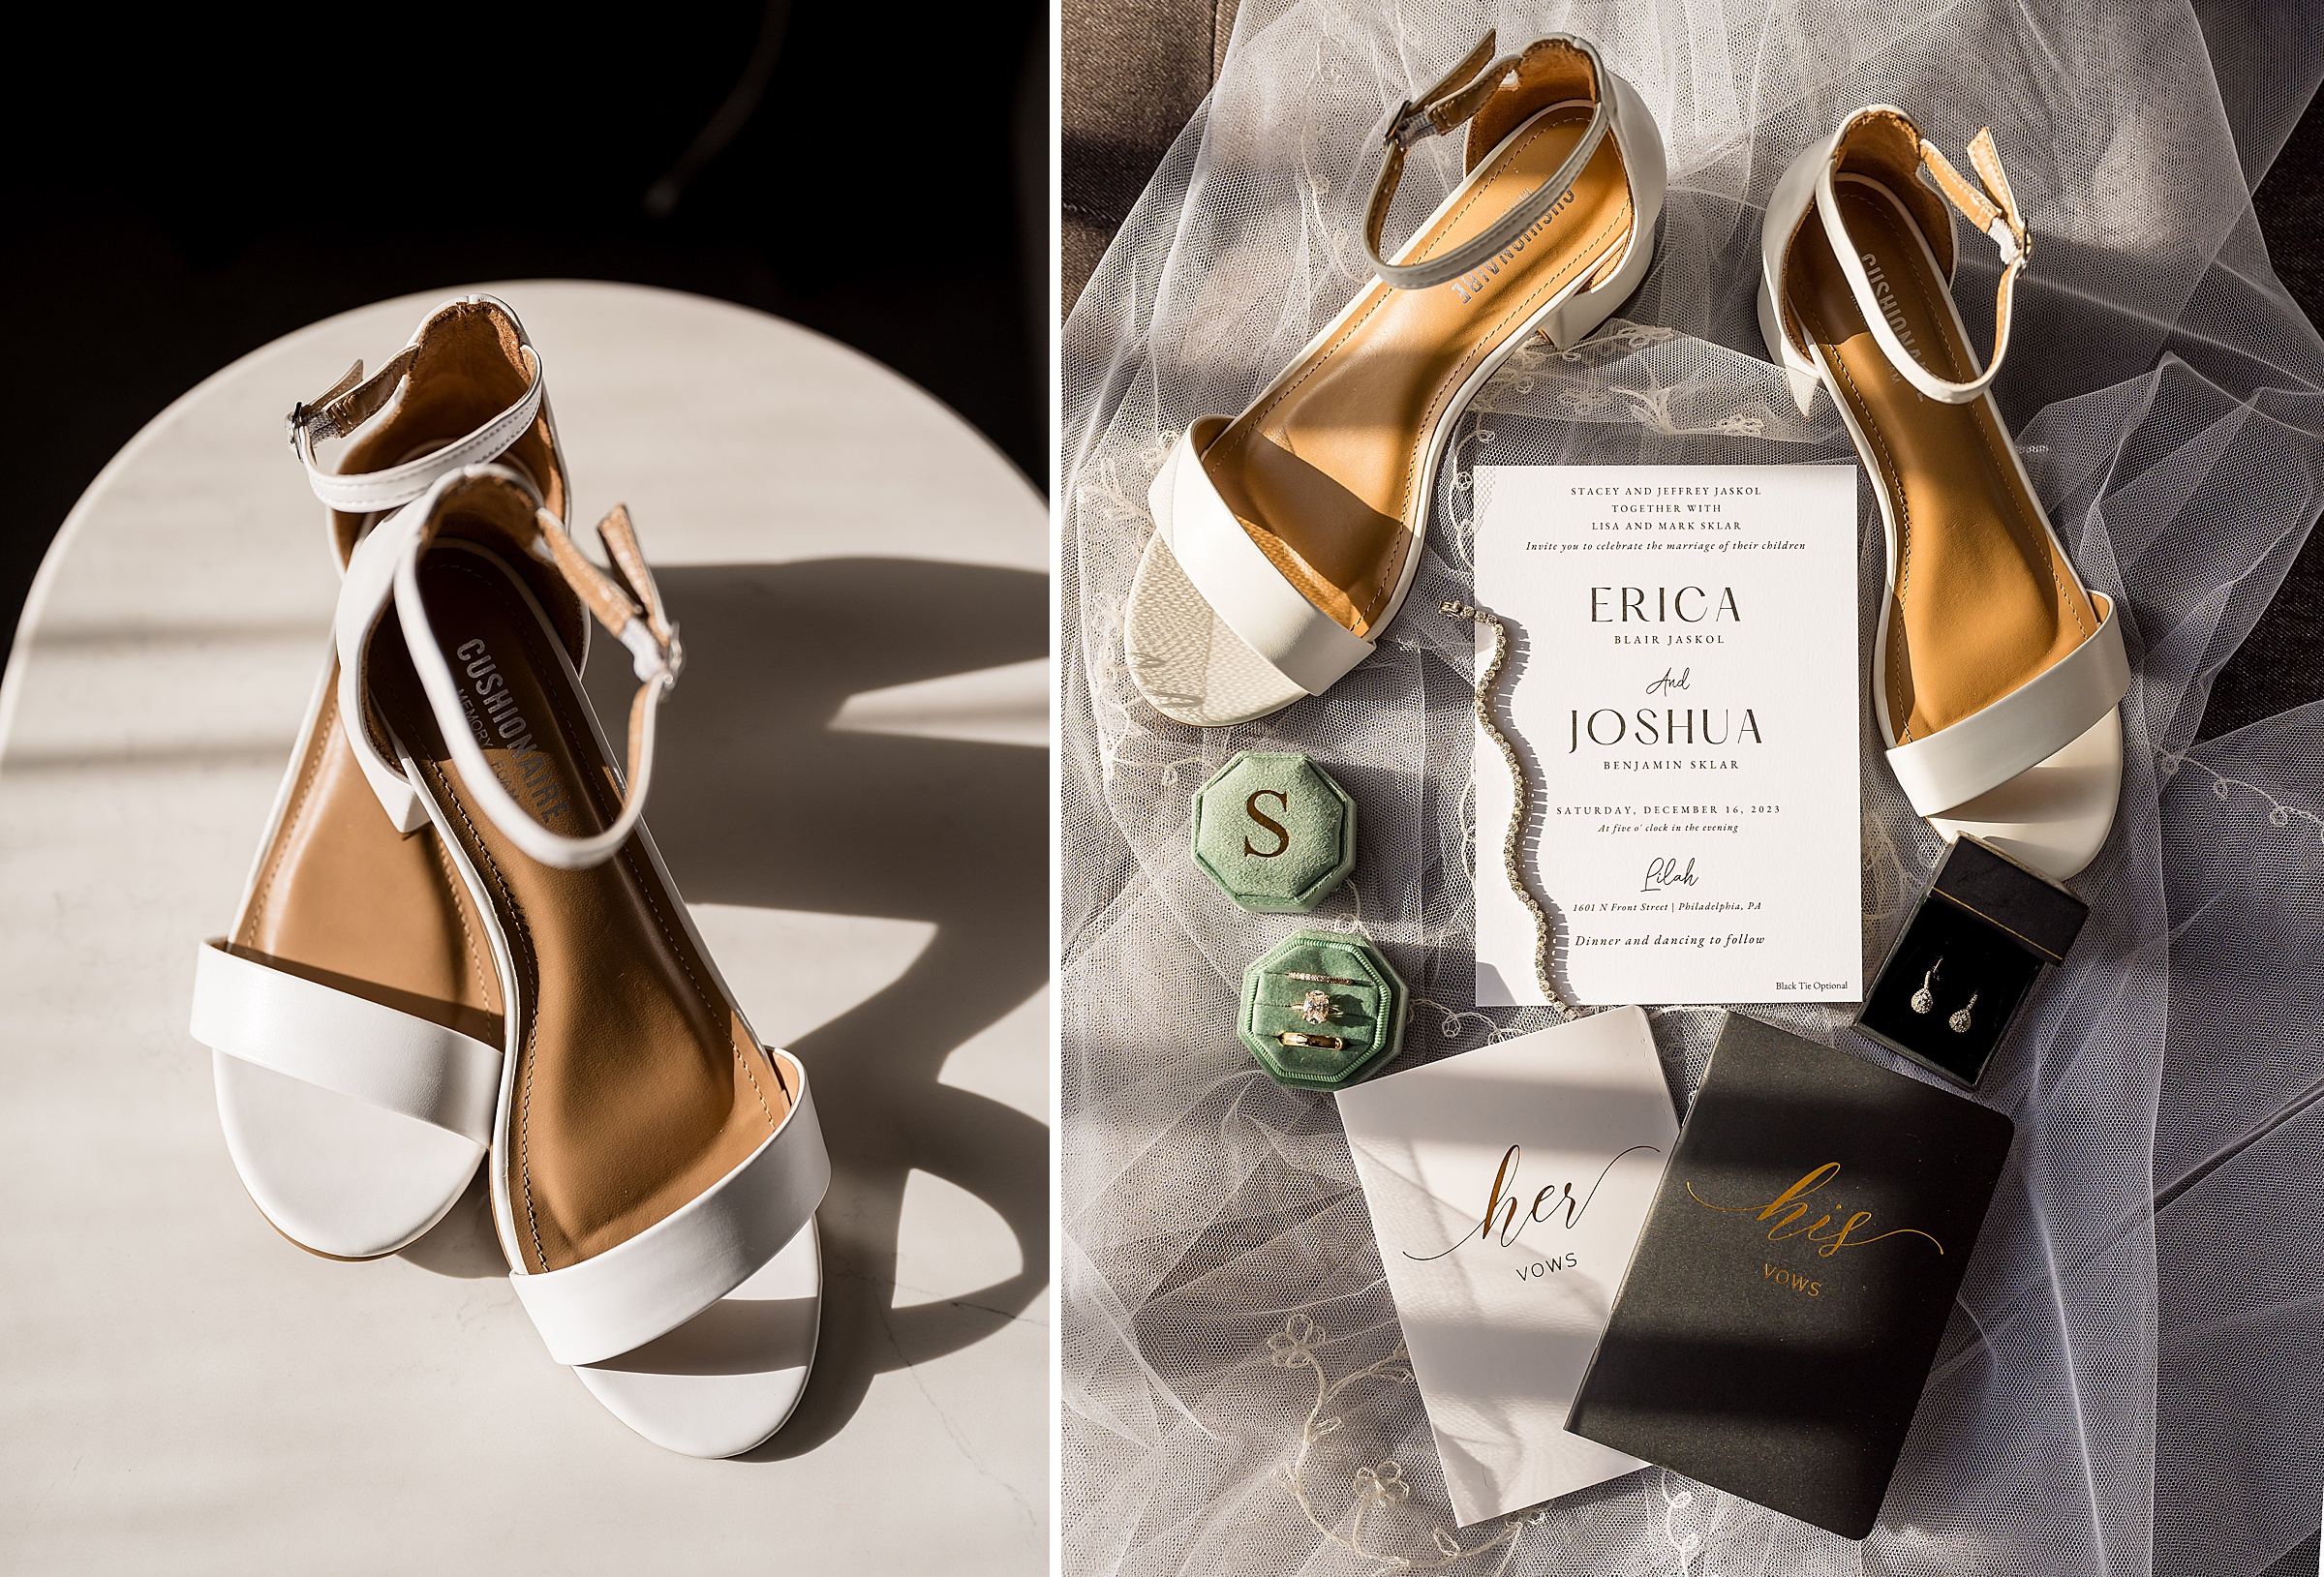 At Lilah Events, a pair of white wedding shoes and a wedding card are elegantly displayed on a table.